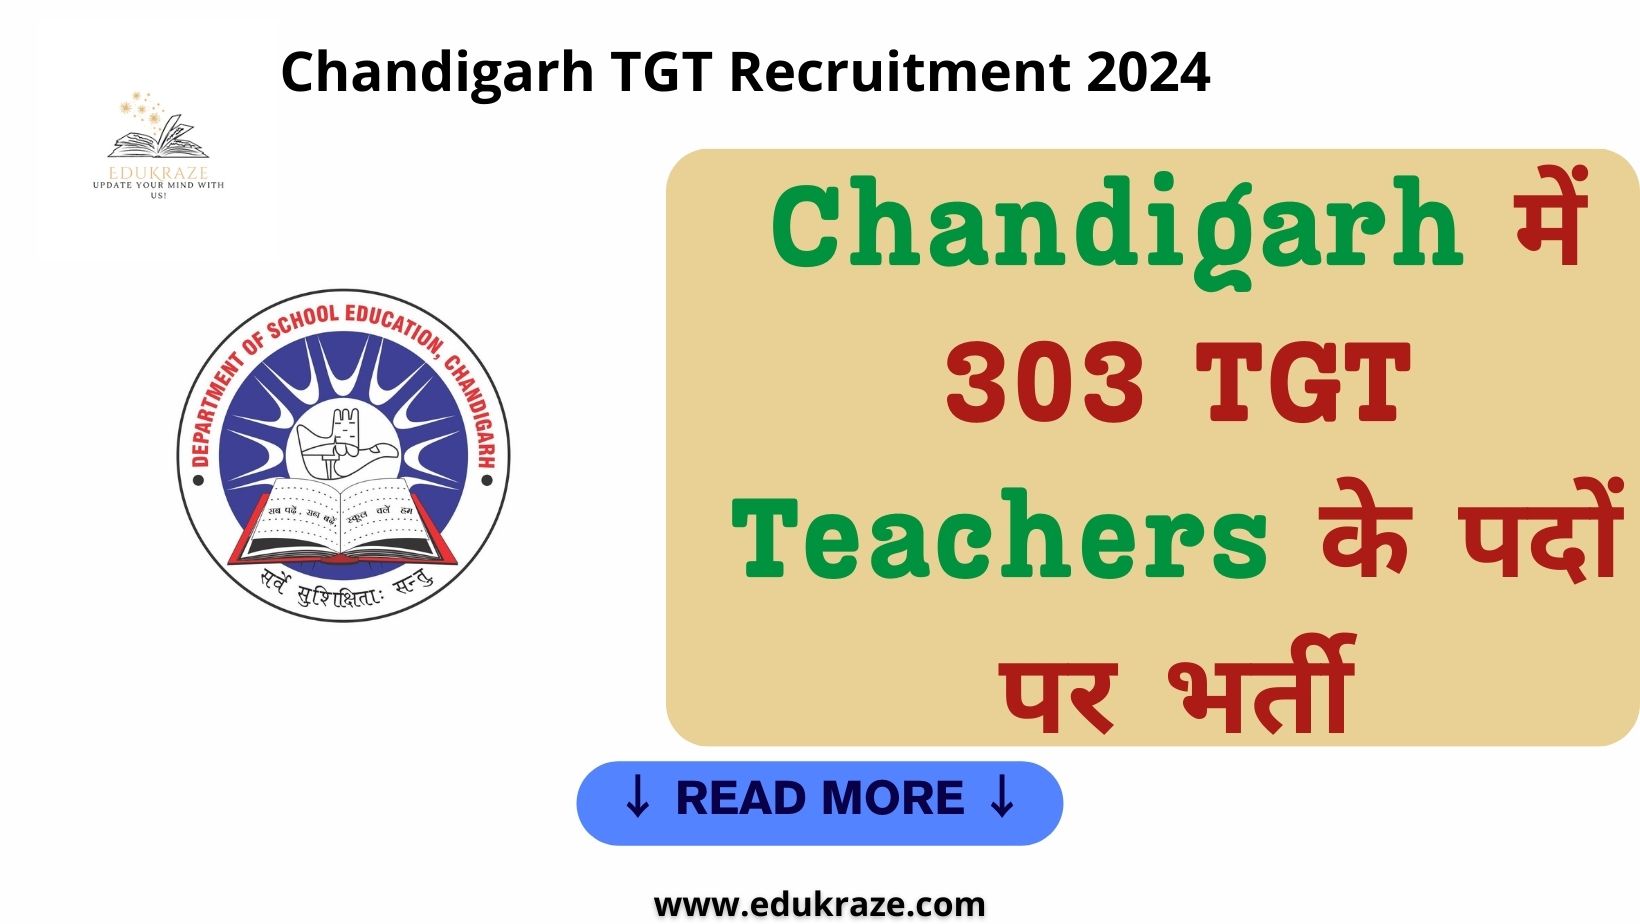 Chandigarh TGT Recruitment 2024 Notification Out for 303 Posts